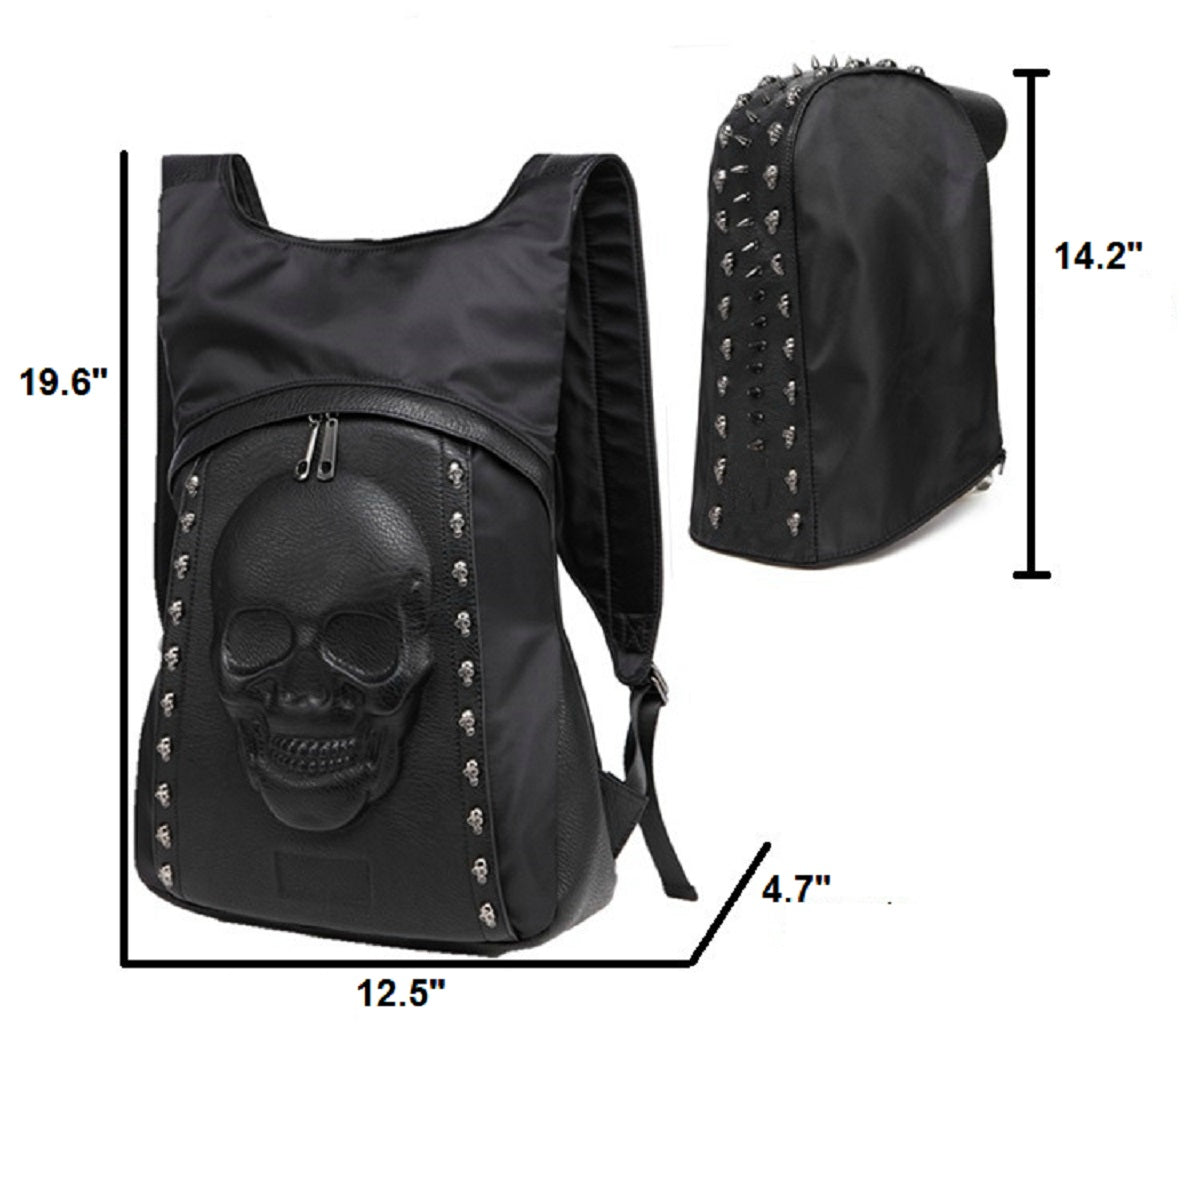 A 3D Skull Backpack Hoodie with skull and spikes on it.